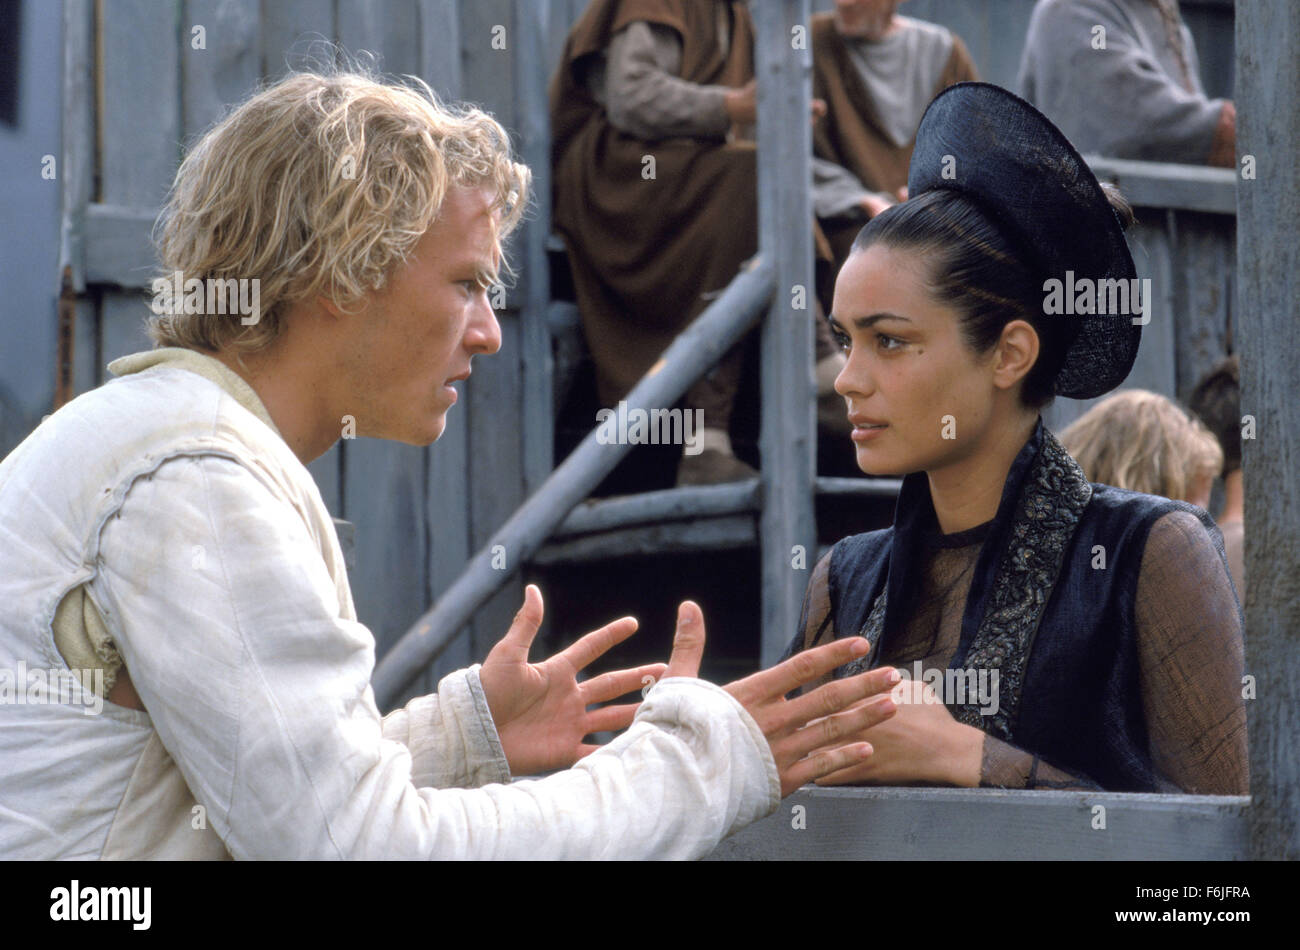 RELEASED Oct 11, 2001 - A KNIGHT'S TALE - From peasant to knight - one man can change his stars. Directed by Brian Helgeland. Shot in Prague, Czech Republic.   Actor HEATH LEDGER as Sir William Thatcher / Sir Ulrich von Lichtenstein of Gelderland in 'A Knight's Tale'. And SHANNYN SOSSAMON as Lady Jocelyn. Stock Photo